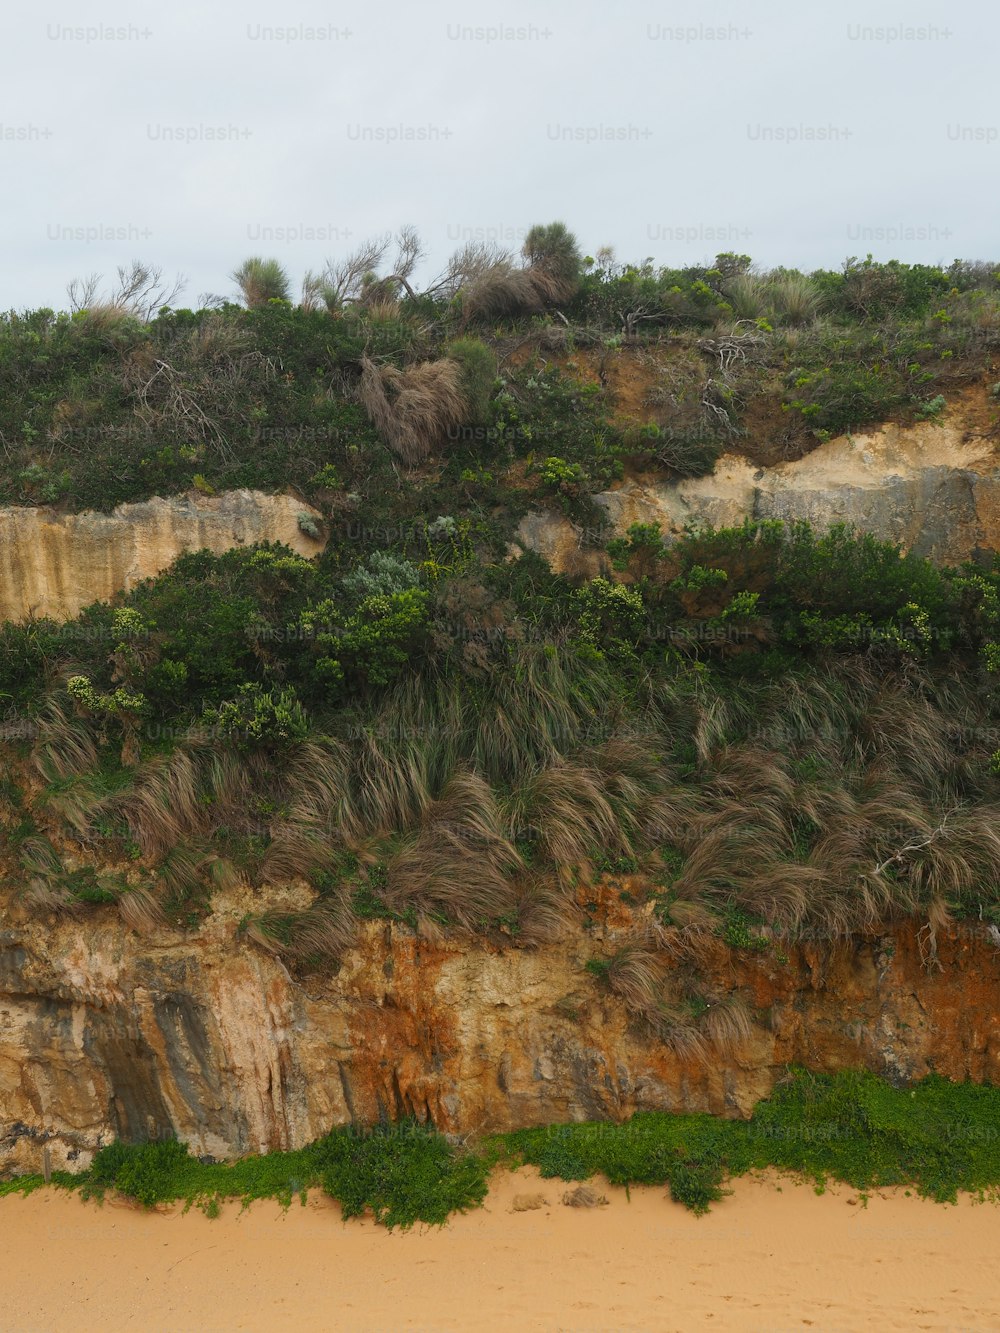 a beach area with a cliff covered in vegetation